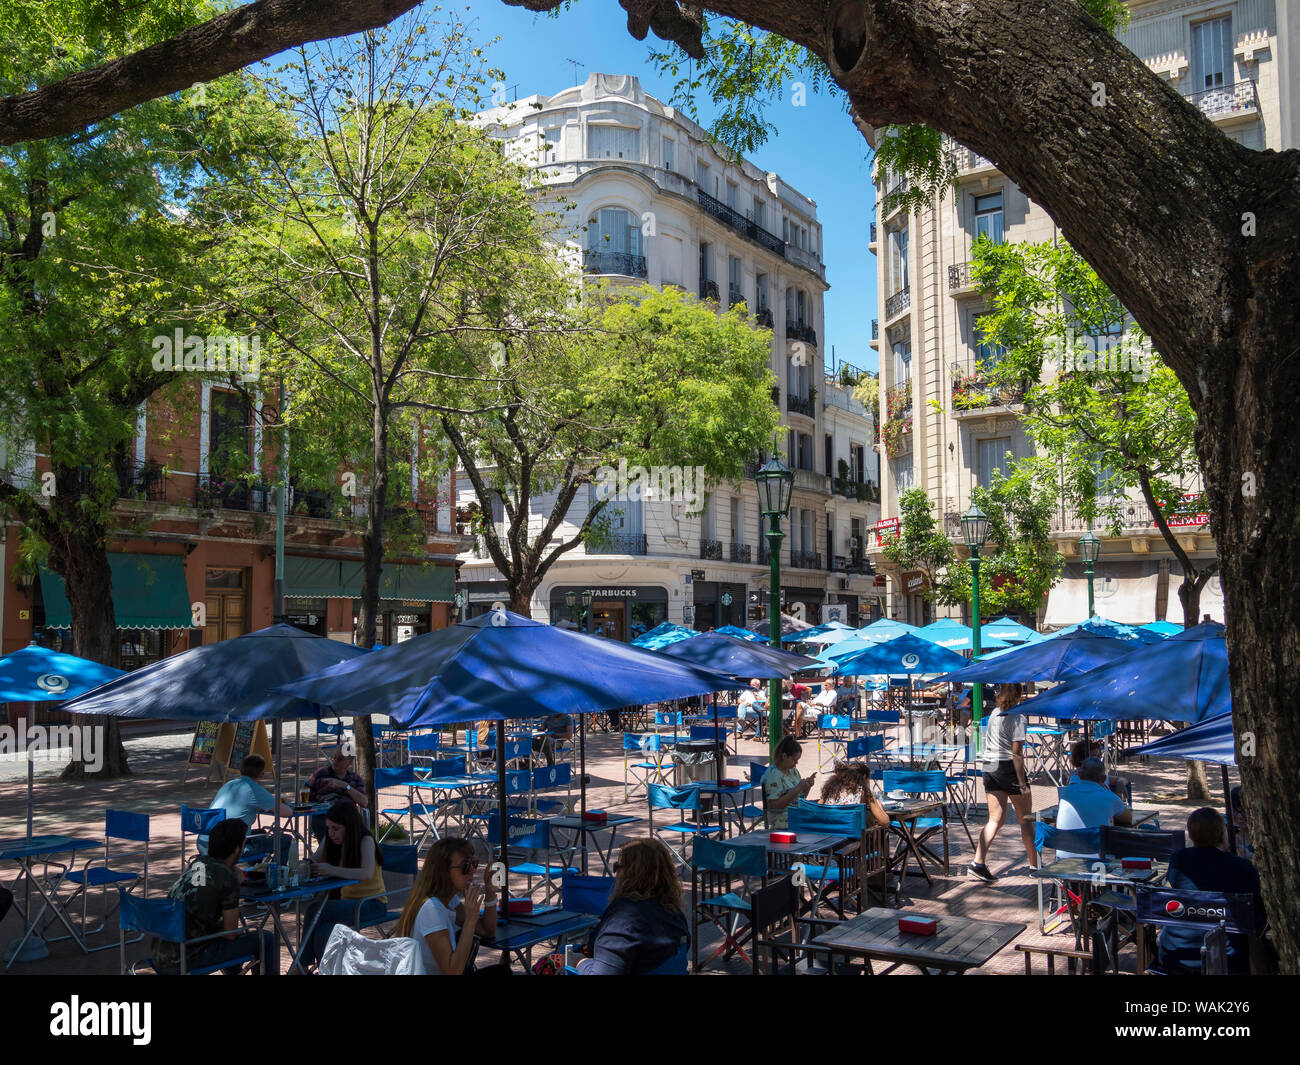 Plaza Dorrego in San Telmo, Buenos Aires, Argentina. (Editorial Use Only) Stock Photo